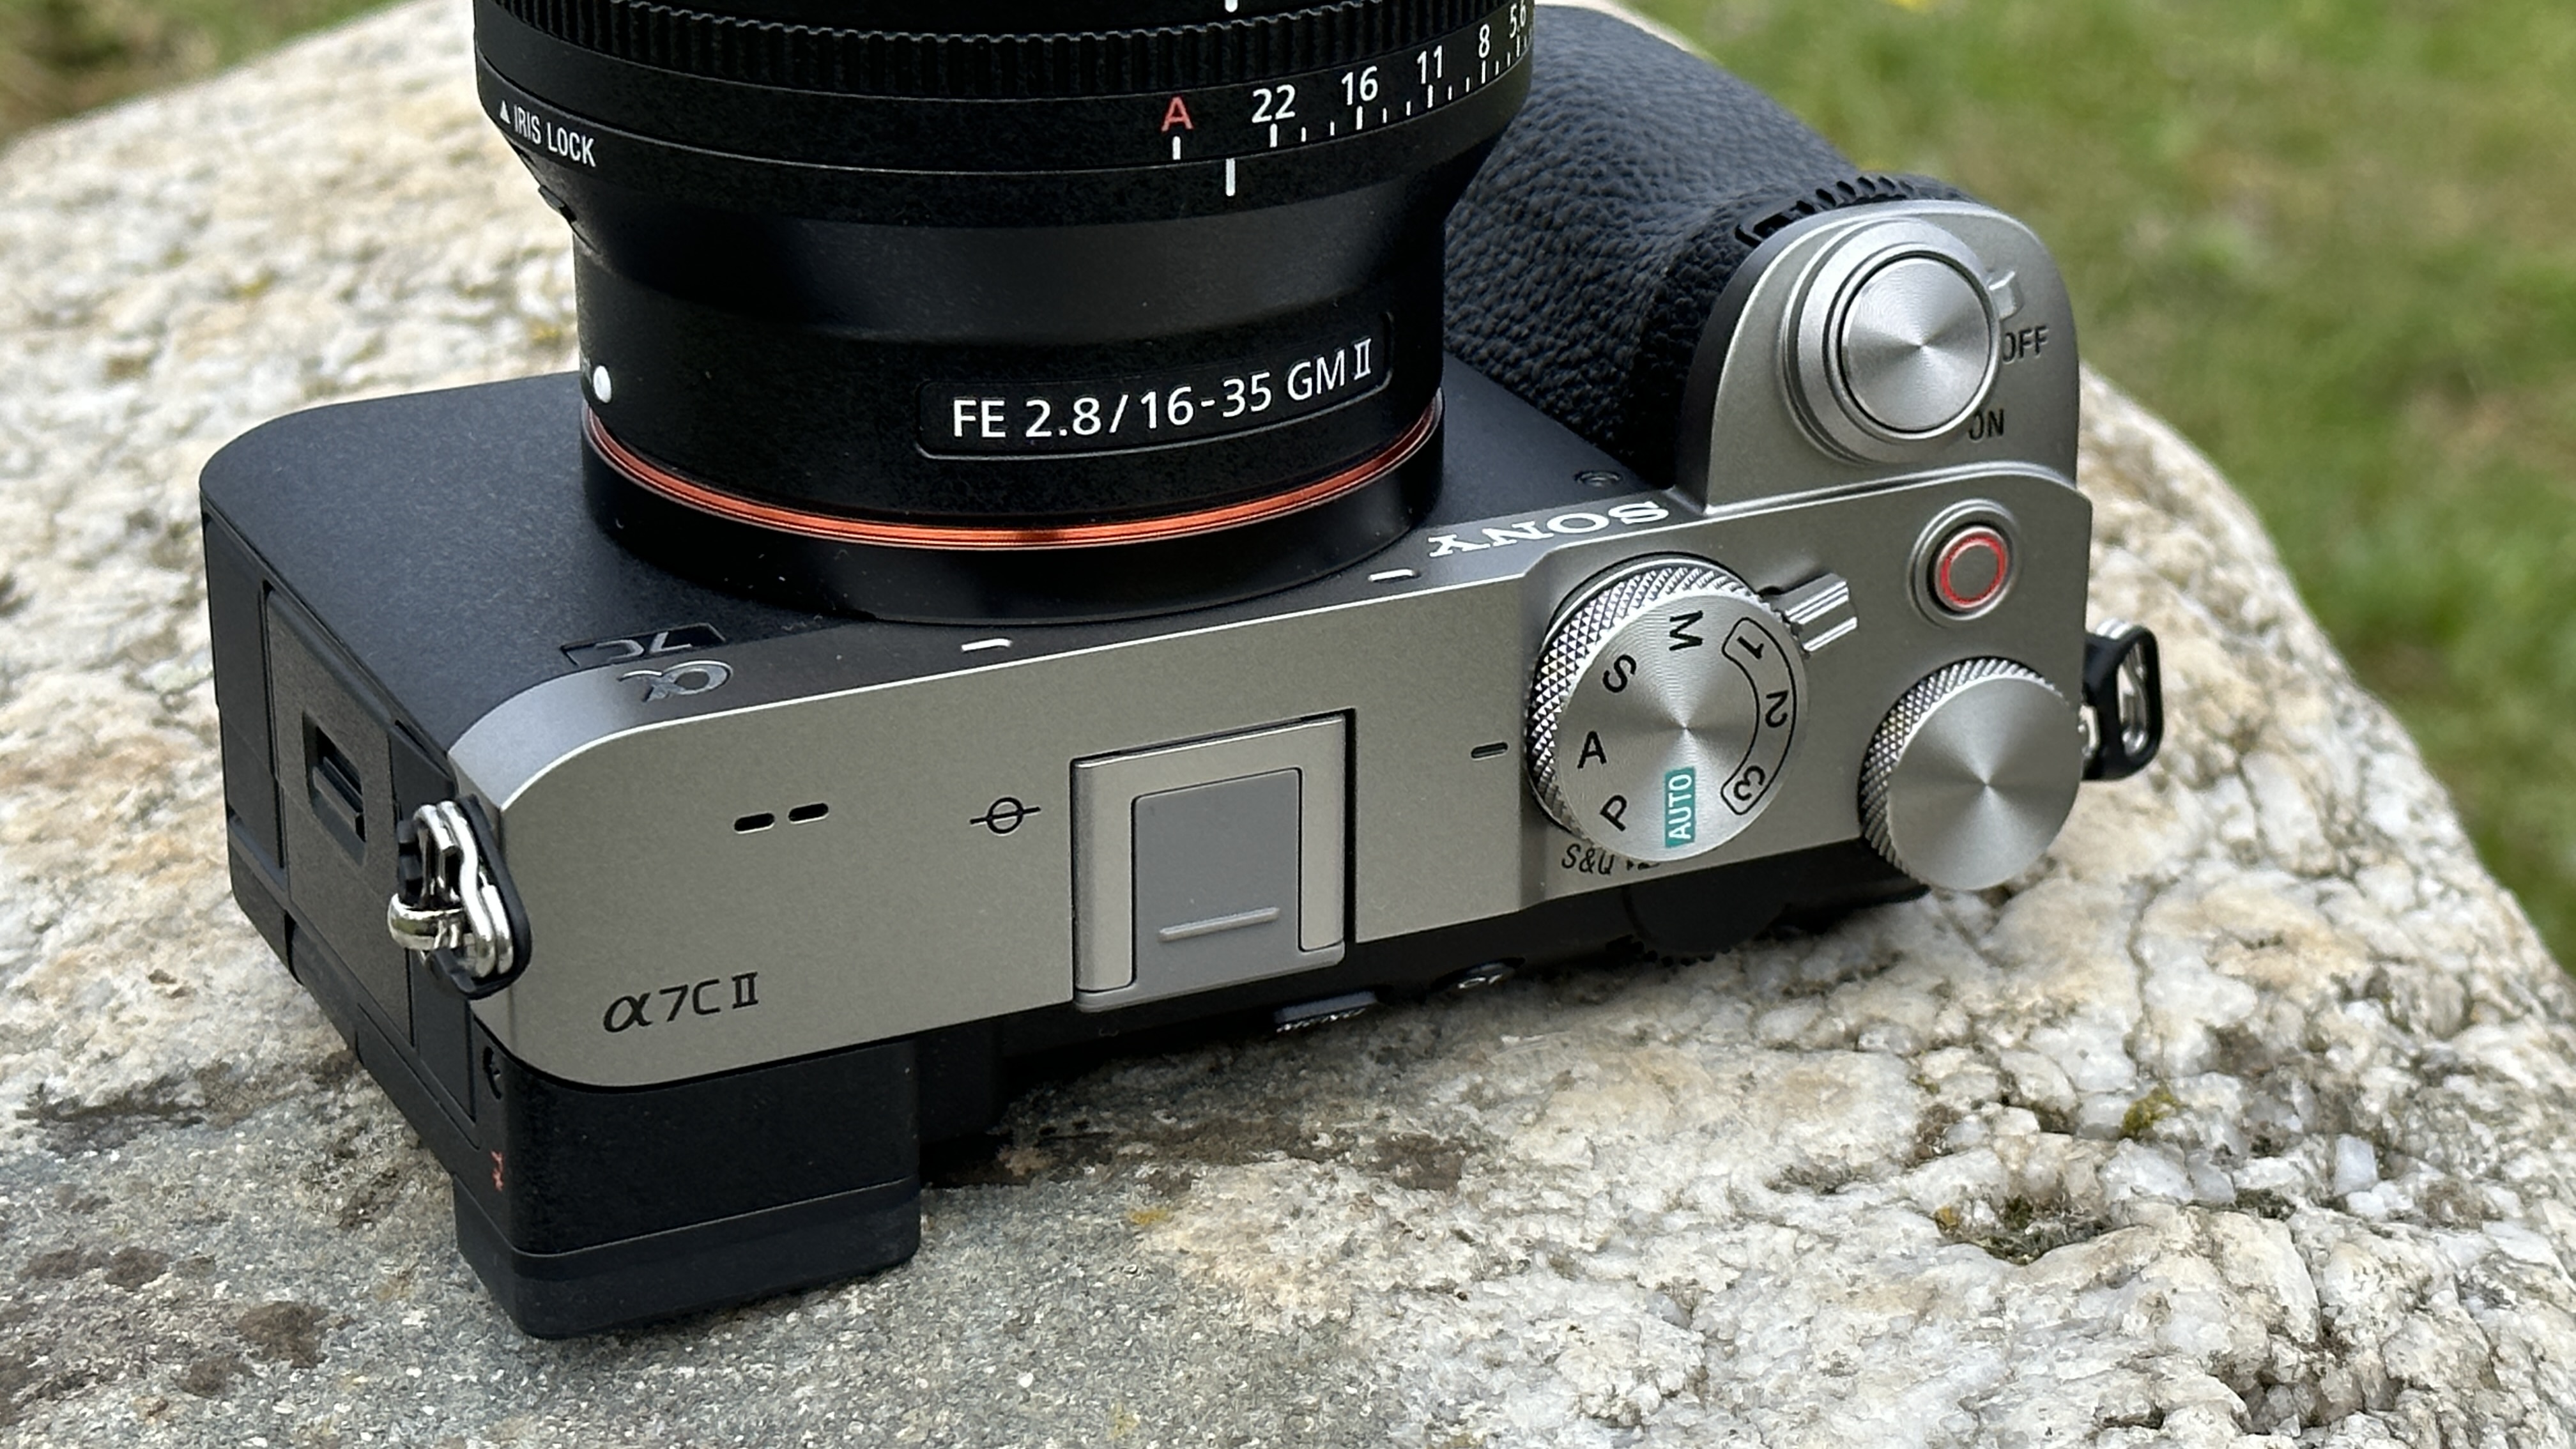 Top plate of Sony A7C II mirrorless camera, outside on a rock with Sony FE 16-35mm F2.8 GM II lens attached